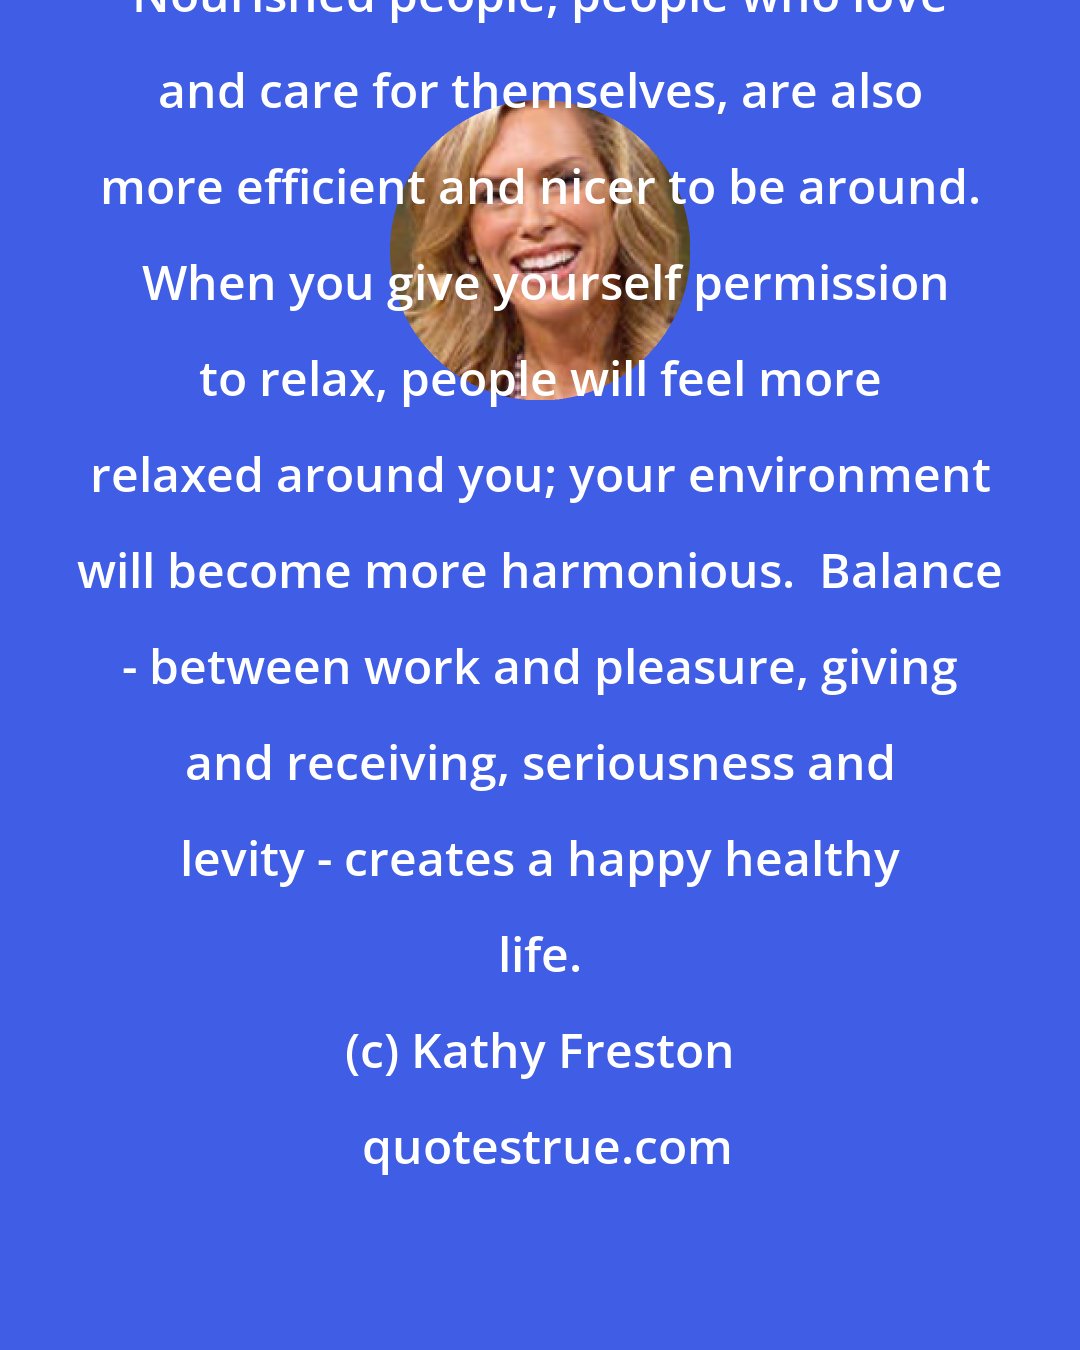 Kathy Freston: Nourished people, people who love and care for themselves, are also more efficient and nicer to be around.  When you give yourself permission to relax, people will feel more relaxed around you; your environment will become more harmonious.  Balance - between work and pleasure, giving and receiving, seriousness and levity - creates a happy healthy life.